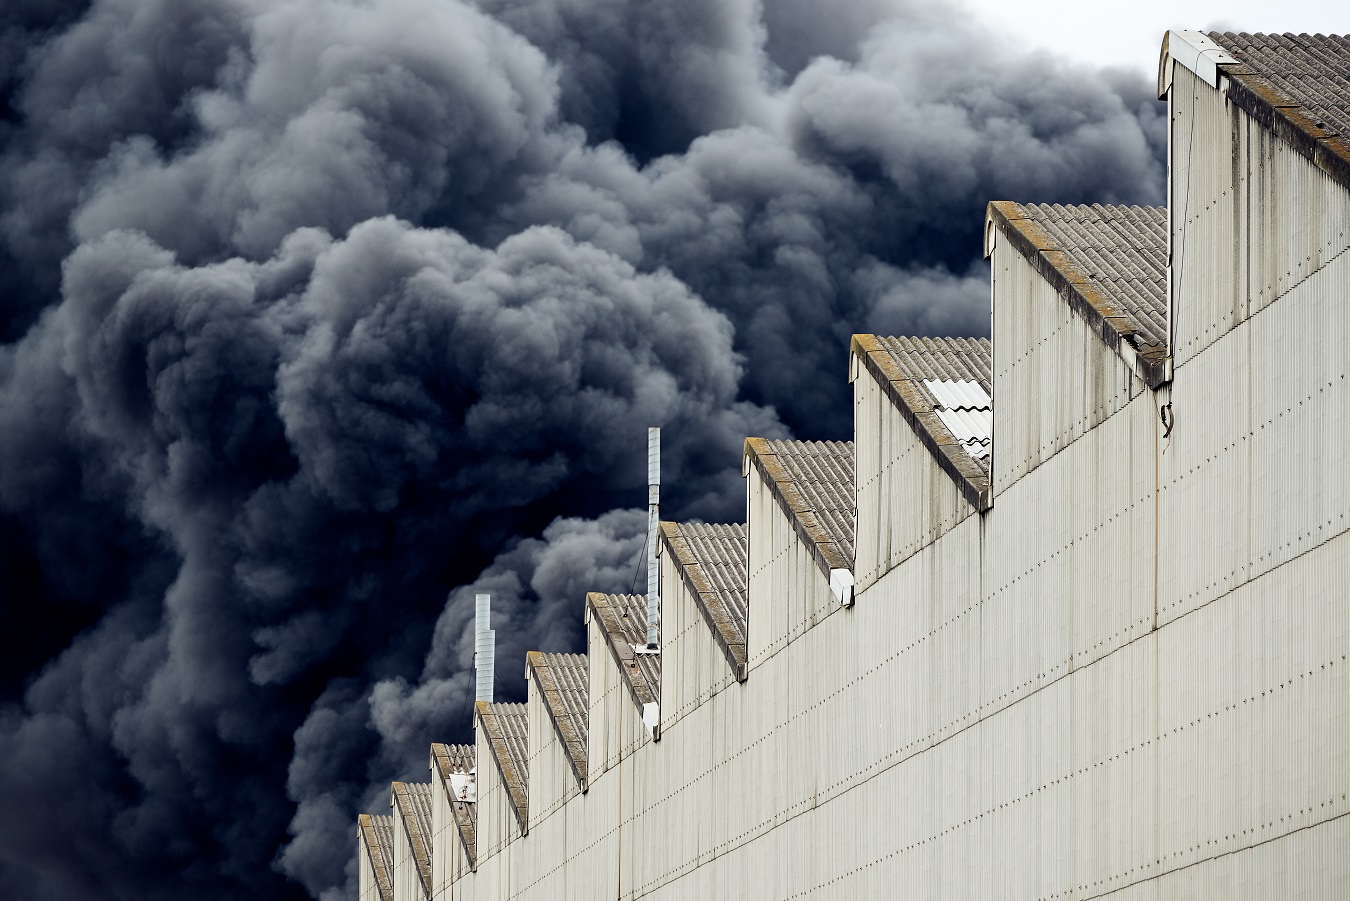 Analysis of Fires in Industrial Facilities or Manufacturing Properties